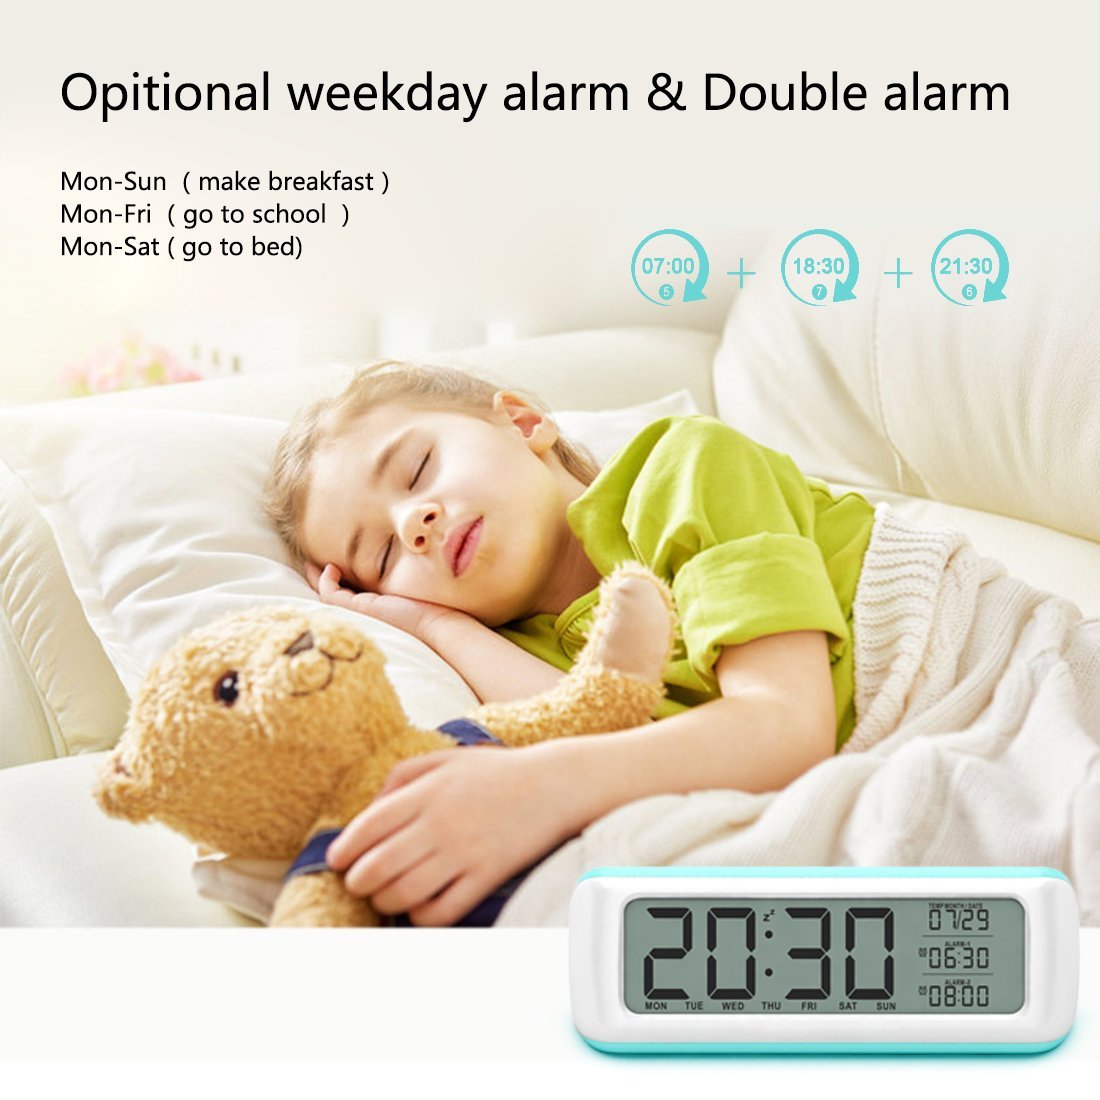 Loskii-DC-12-55quot-Large-Digital-Alarm-Clock-with-Backlight-2-Alarms--Snooze-Optional-Weekday-Alarm-1255294